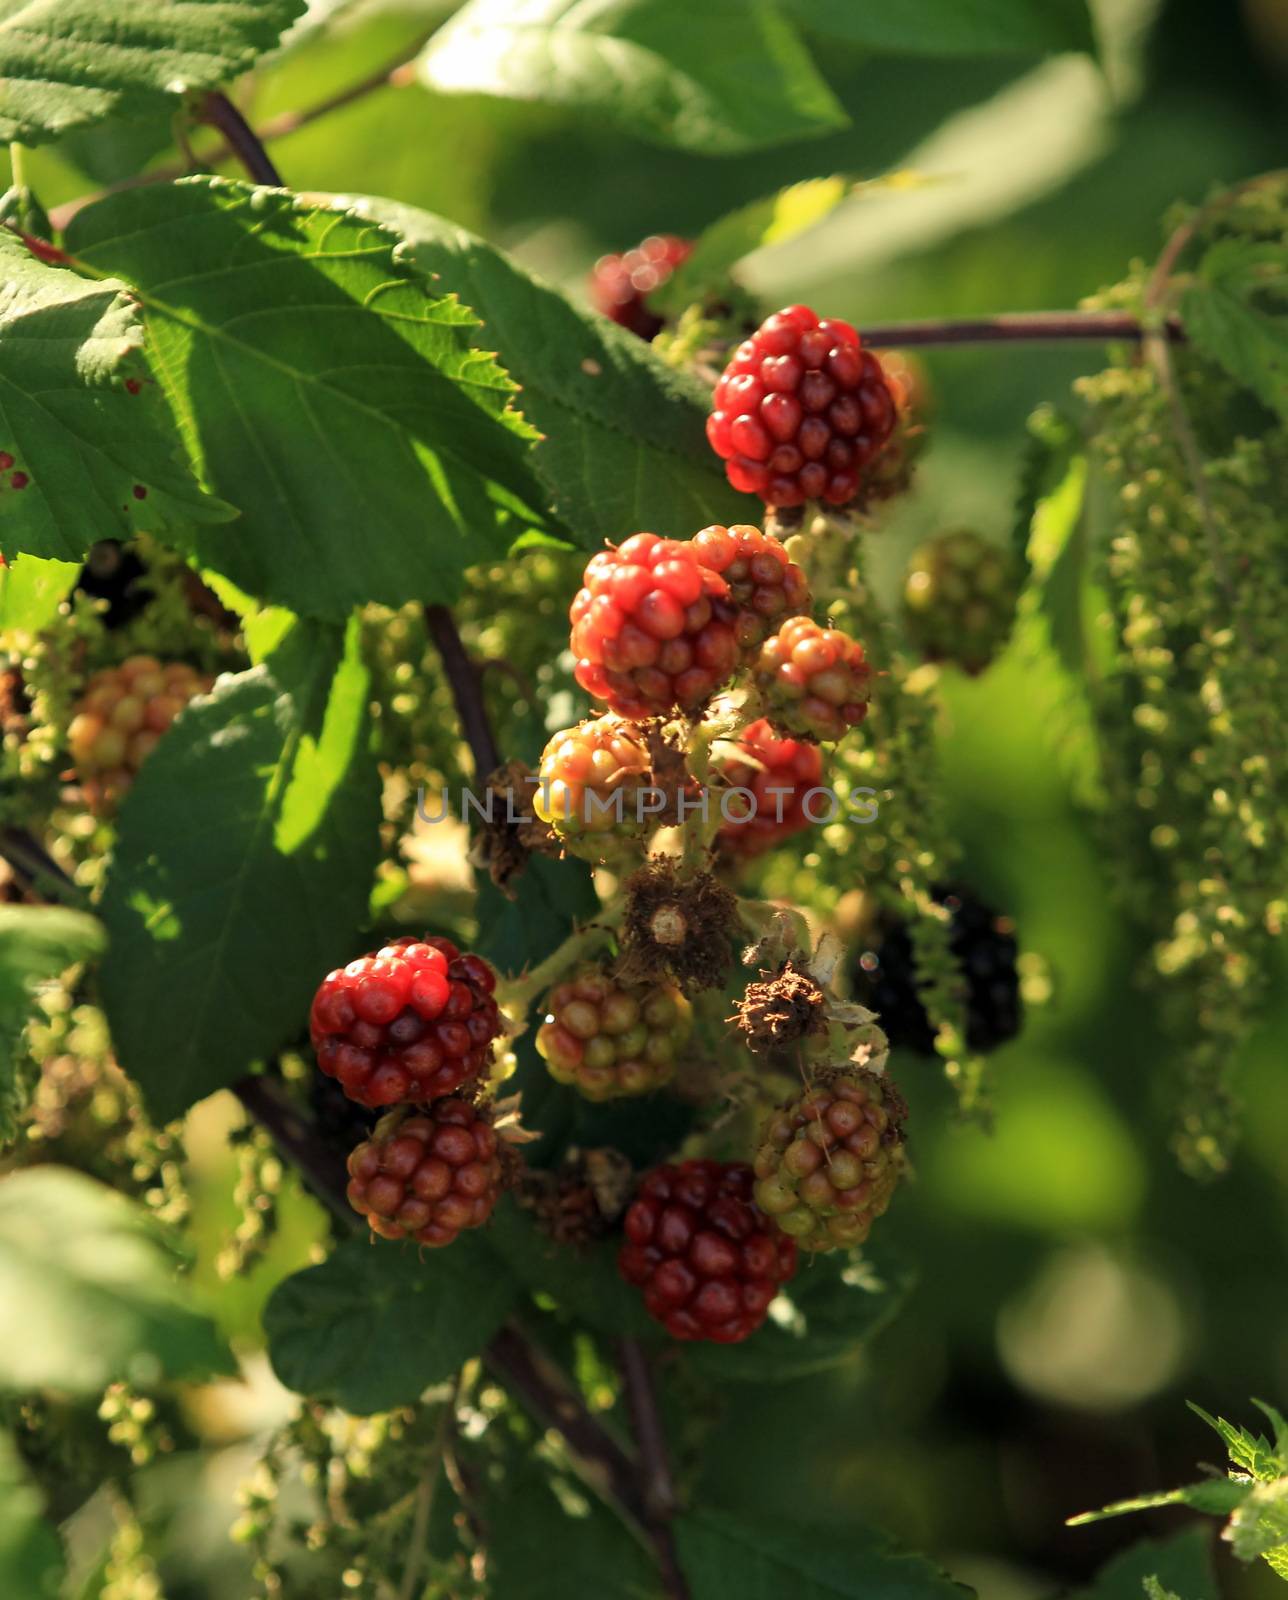 Non mature blackberry fruits growing on branch